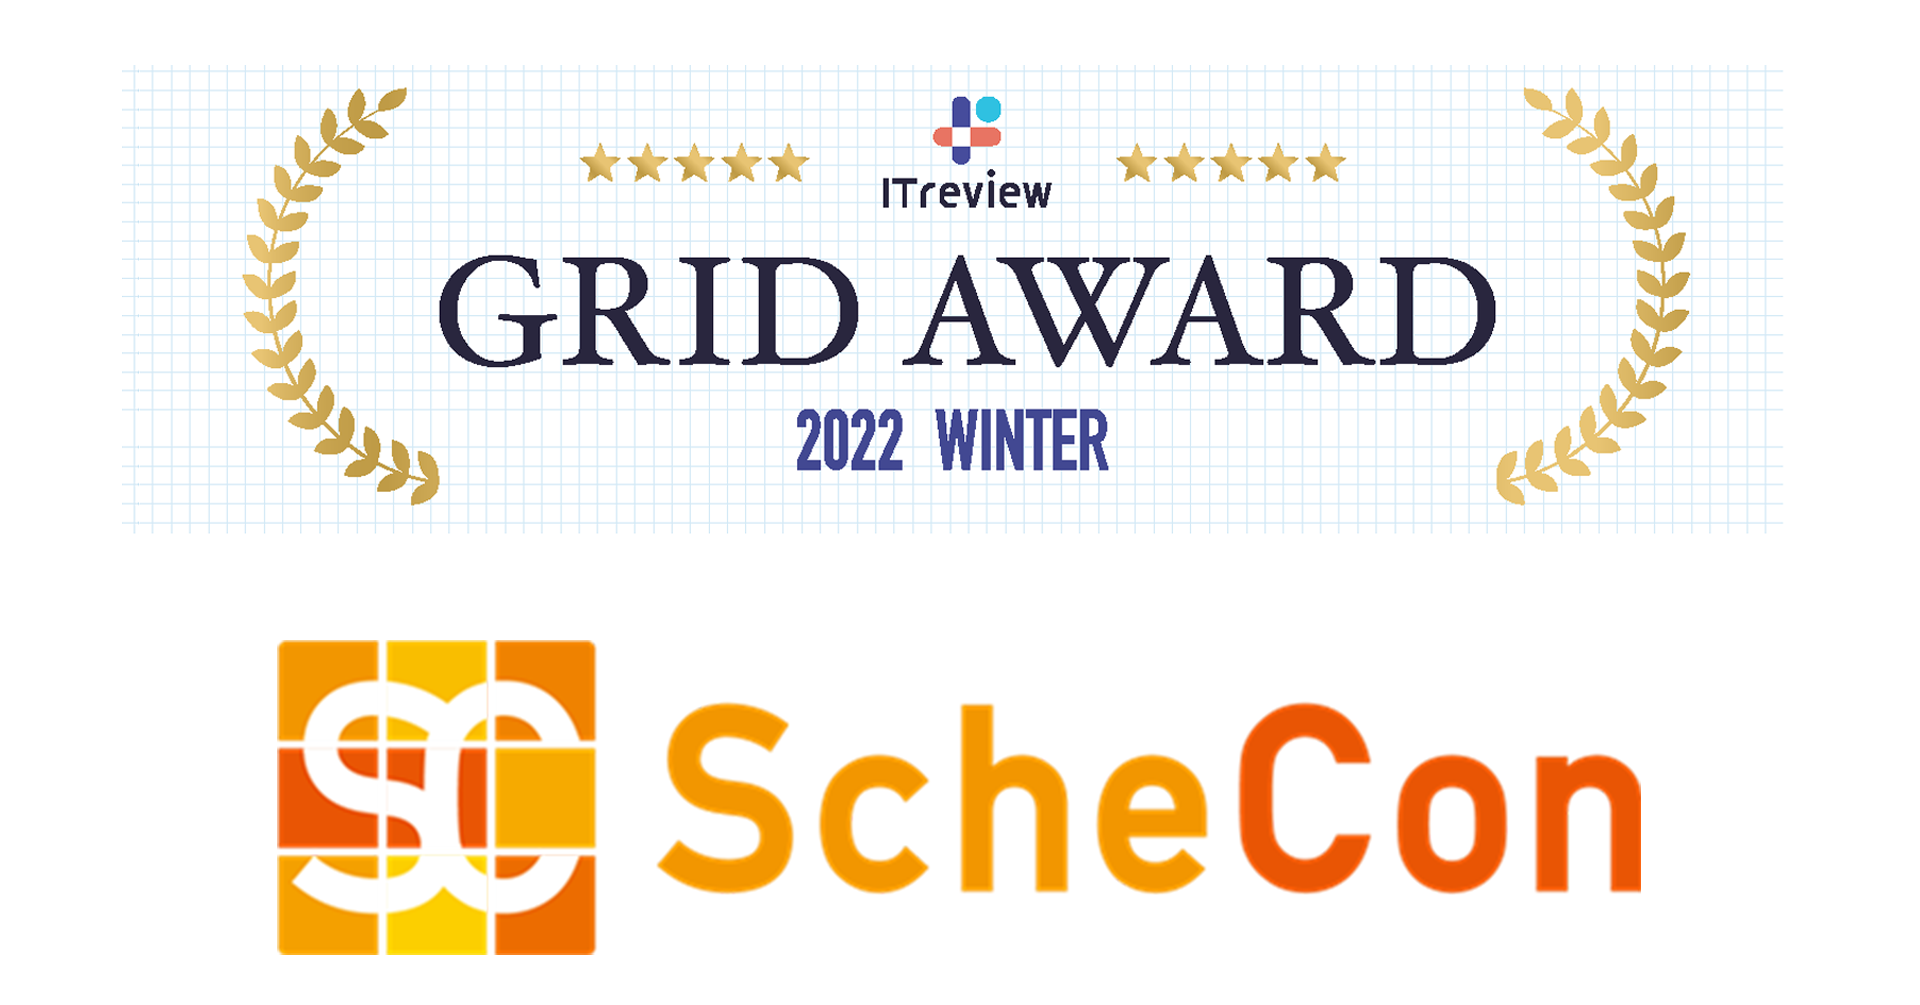 「Schecon」が『ITreview Grid Award 2022 Winter』にて「Leader」を初受賞しました！